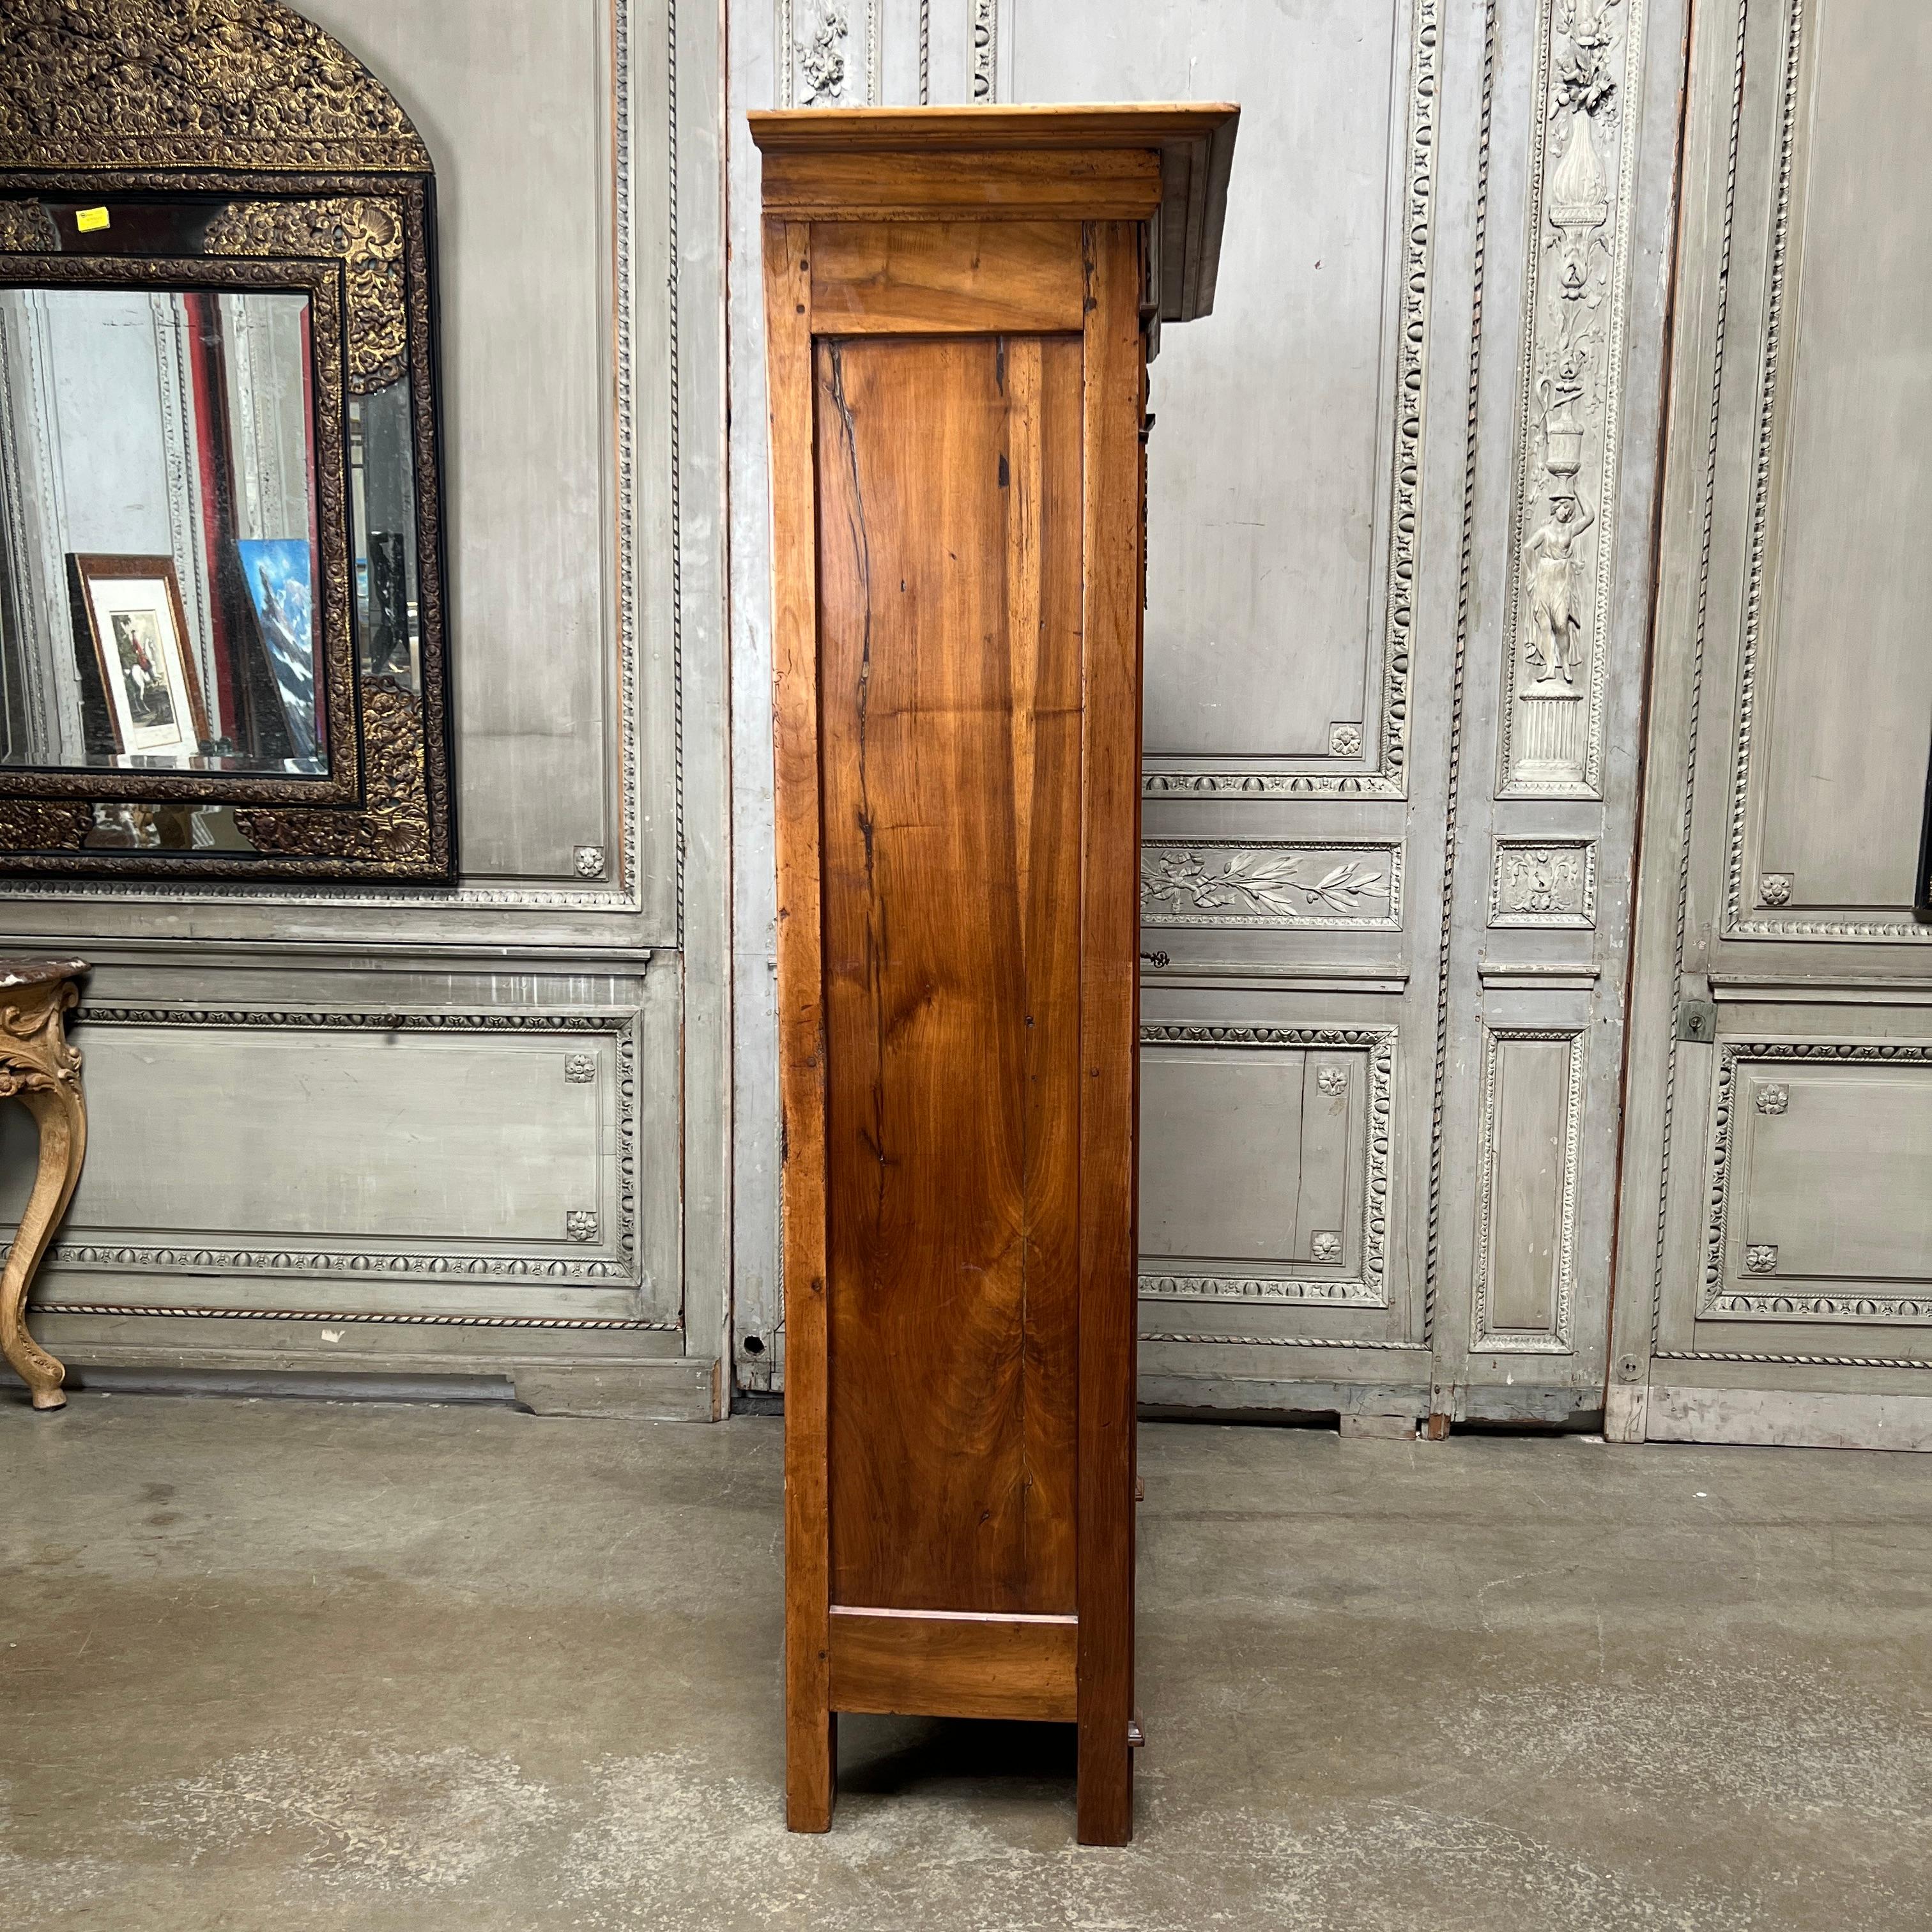 A small charming country French walnut Empire one door armoire-bookcase. 
This piece appears to be early 19th century and has nice neoclassical style bronze mounts. The glass may have been added at a later date by taking out a solid panel at the